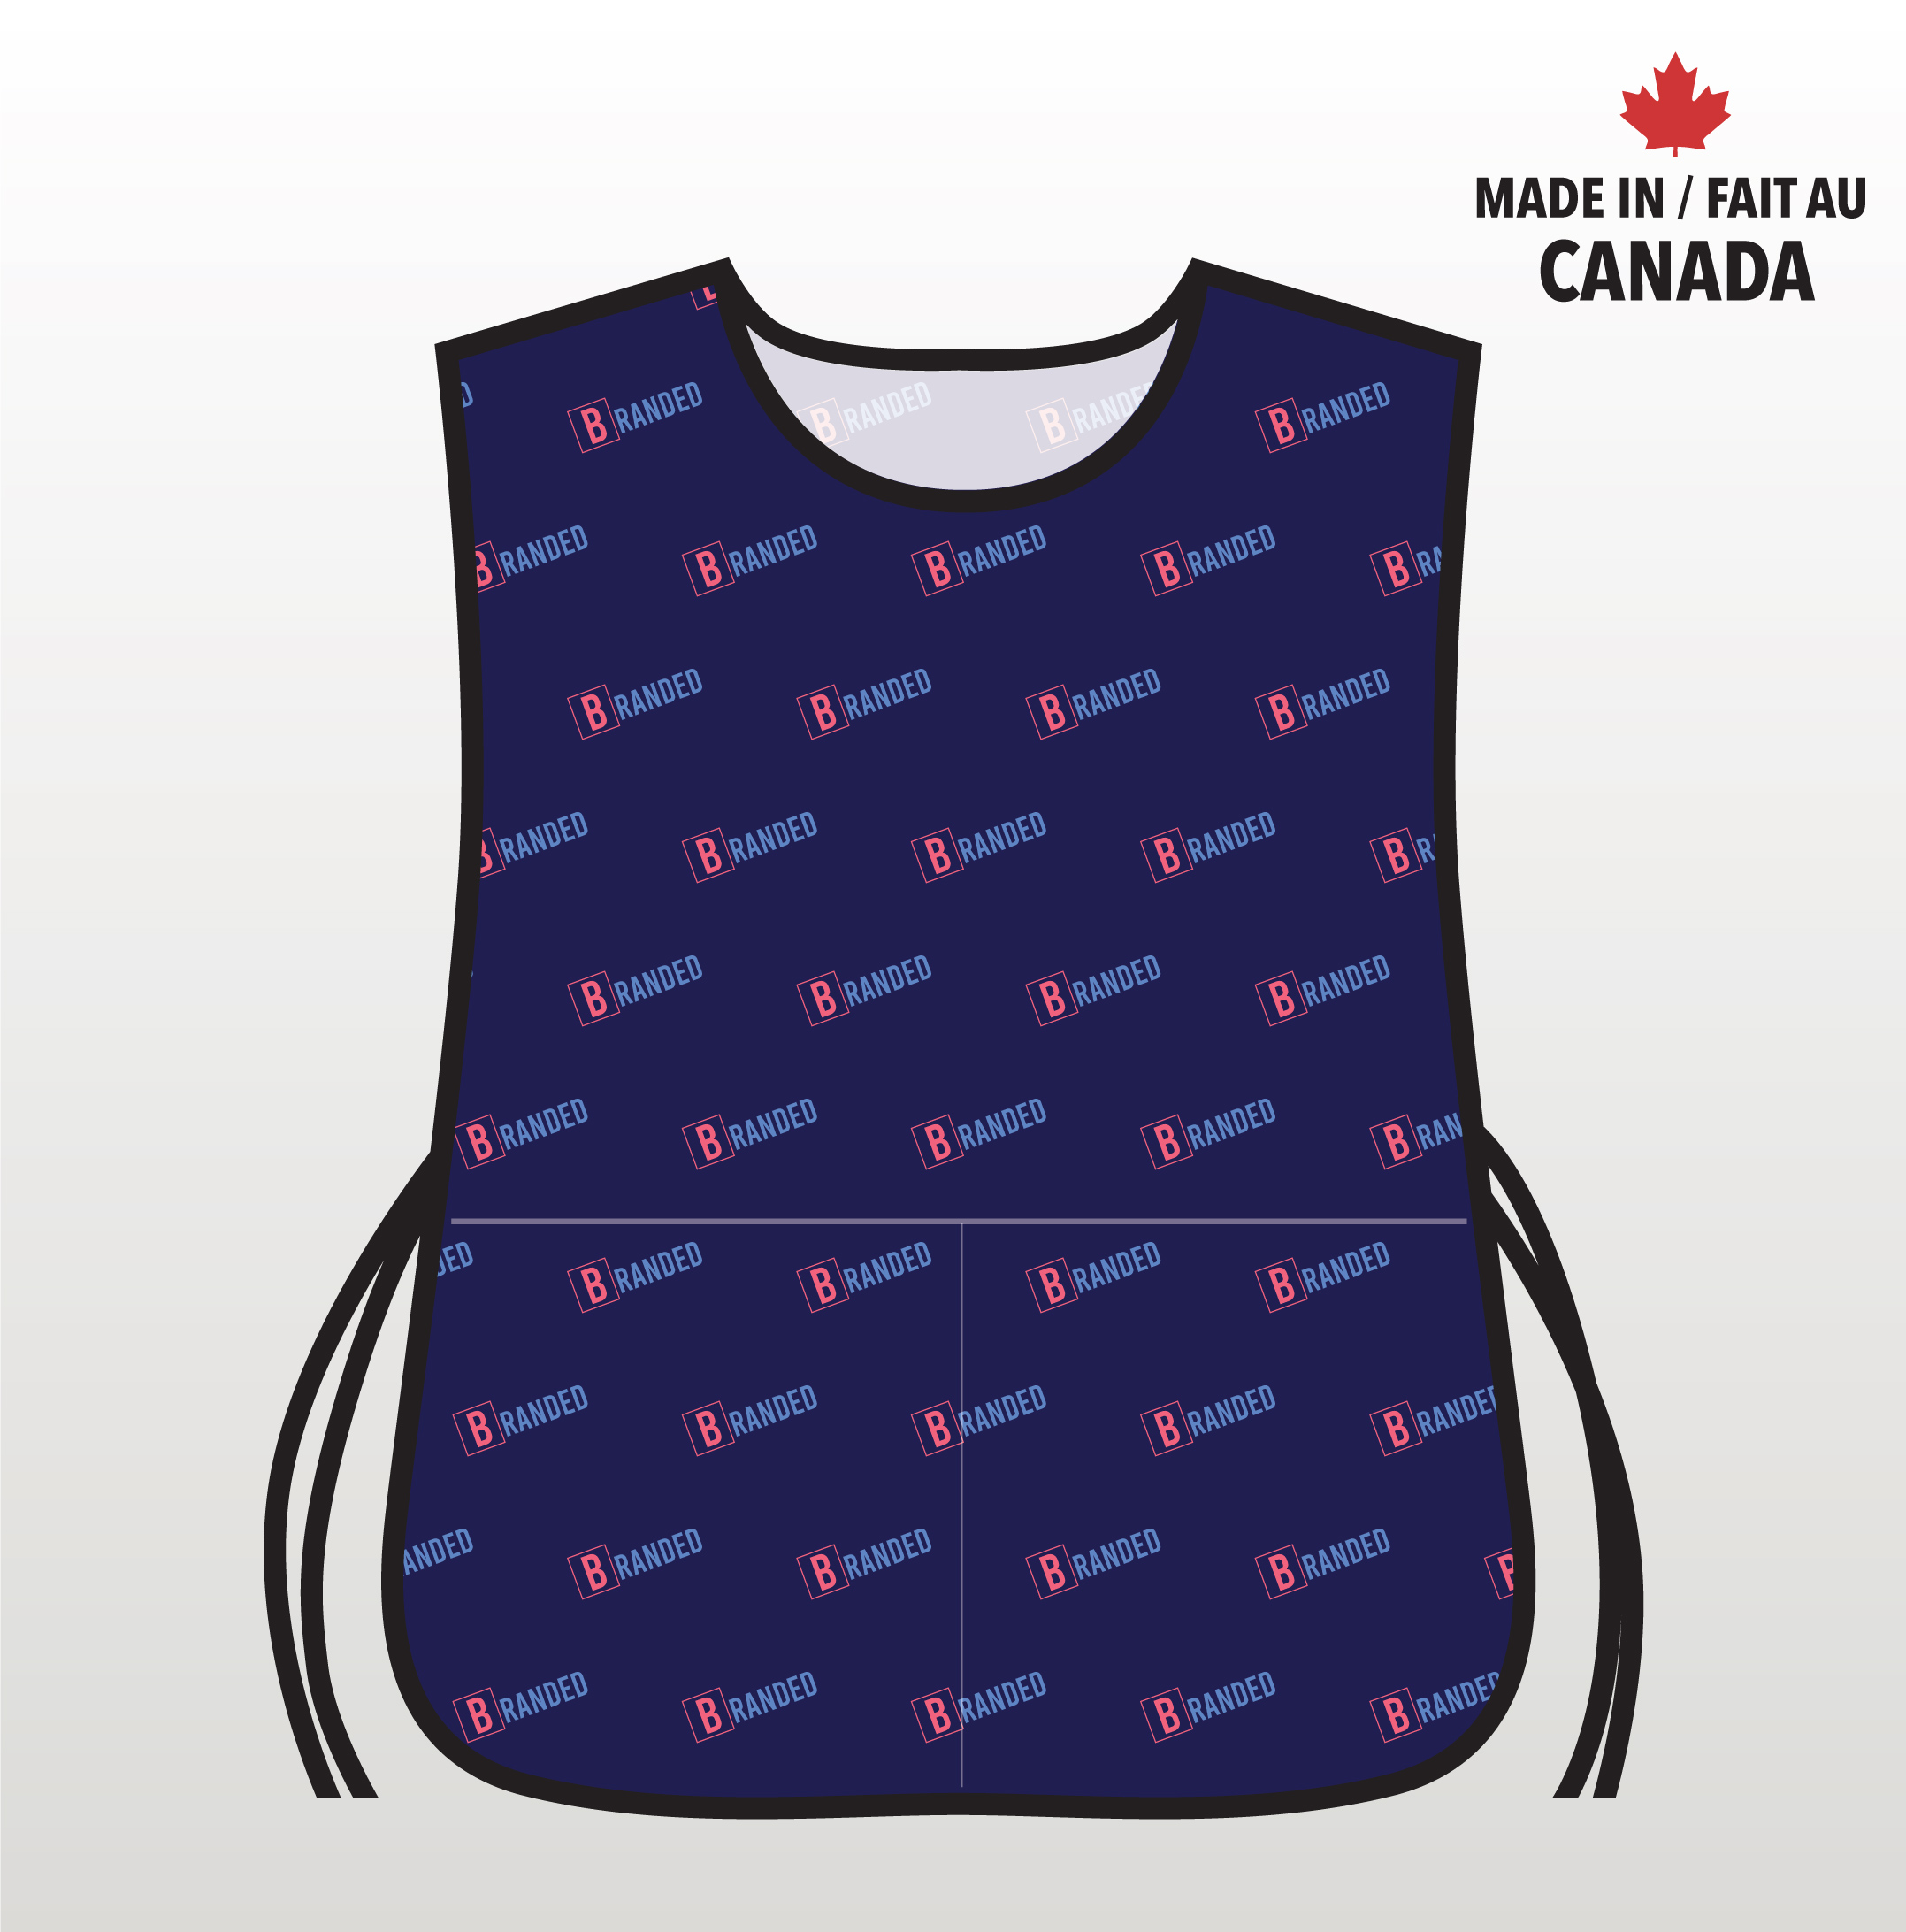 Made in Canda Sublimated Smock/Cobbler Apron/Caddy Bib